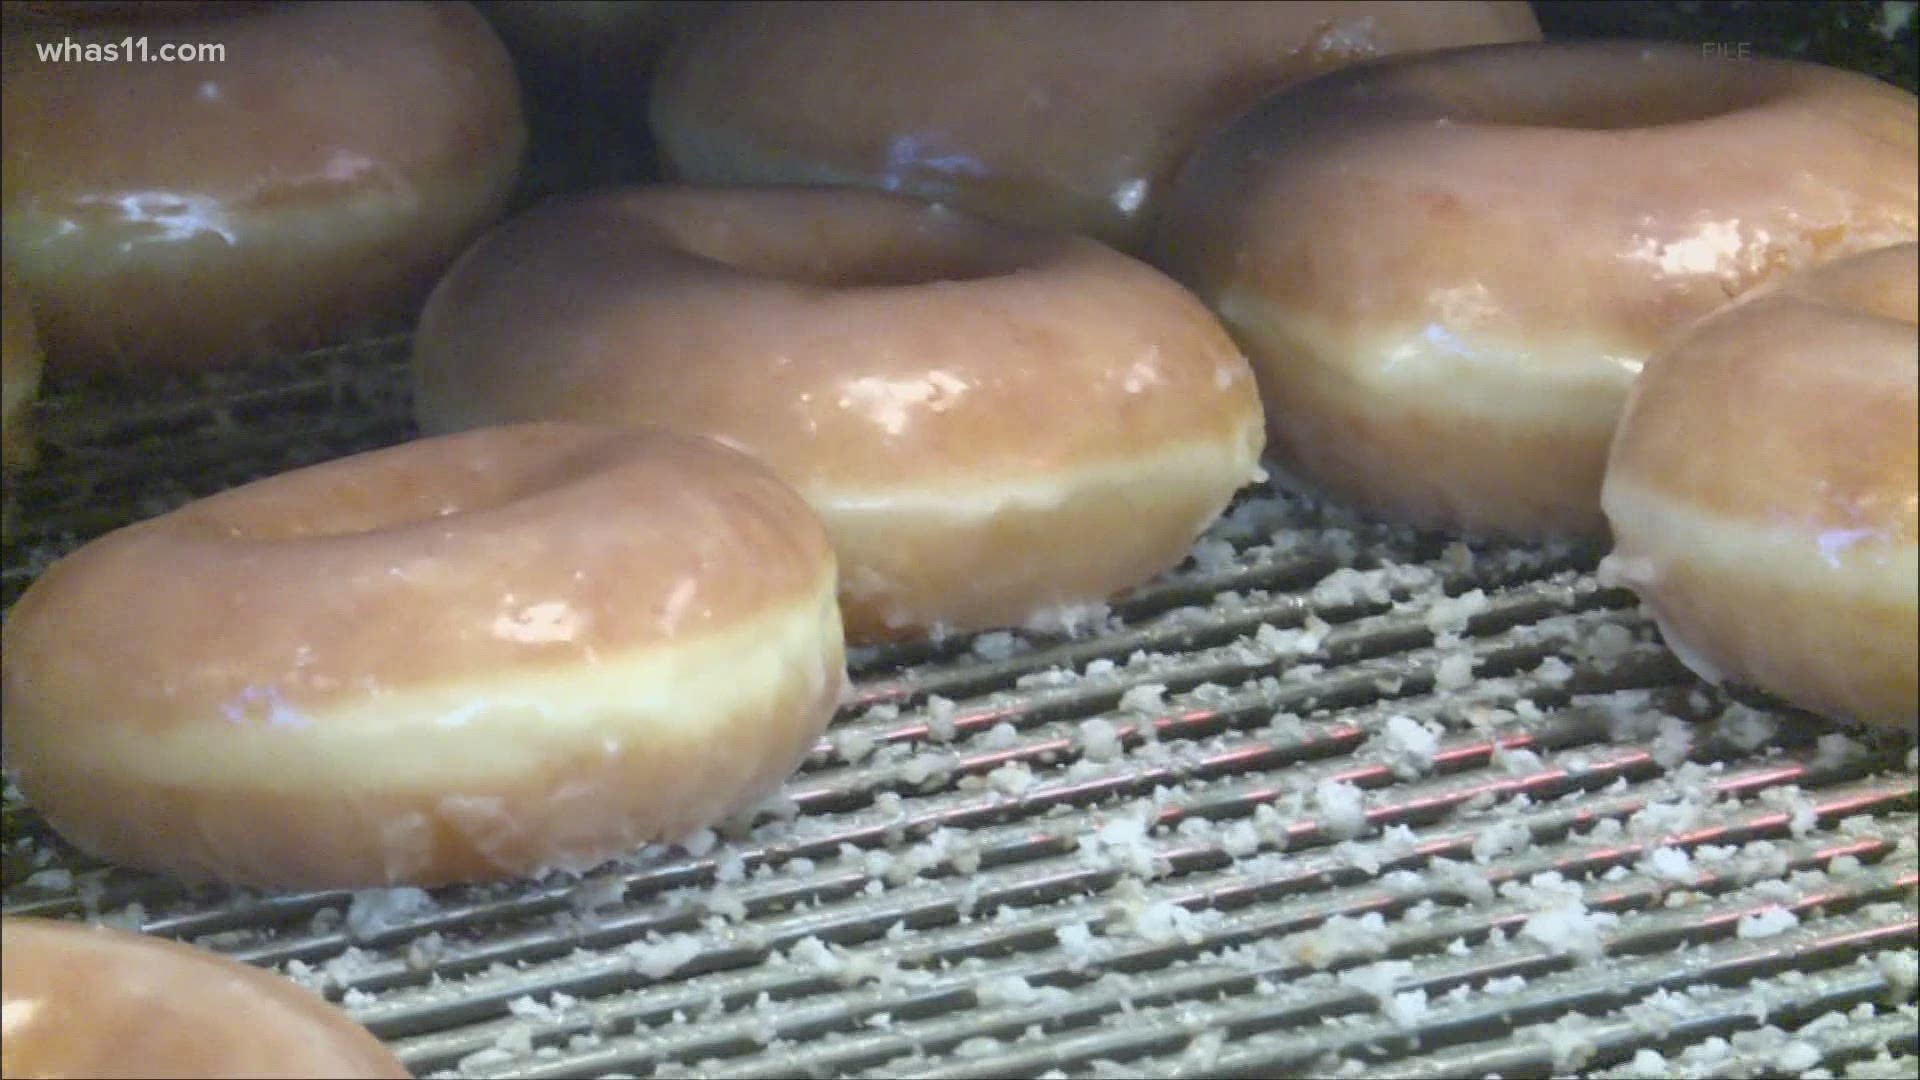 A new donut shop expected to open in Elizabethtown this fall will be making an emphasis on hiring employees who have disabilities.